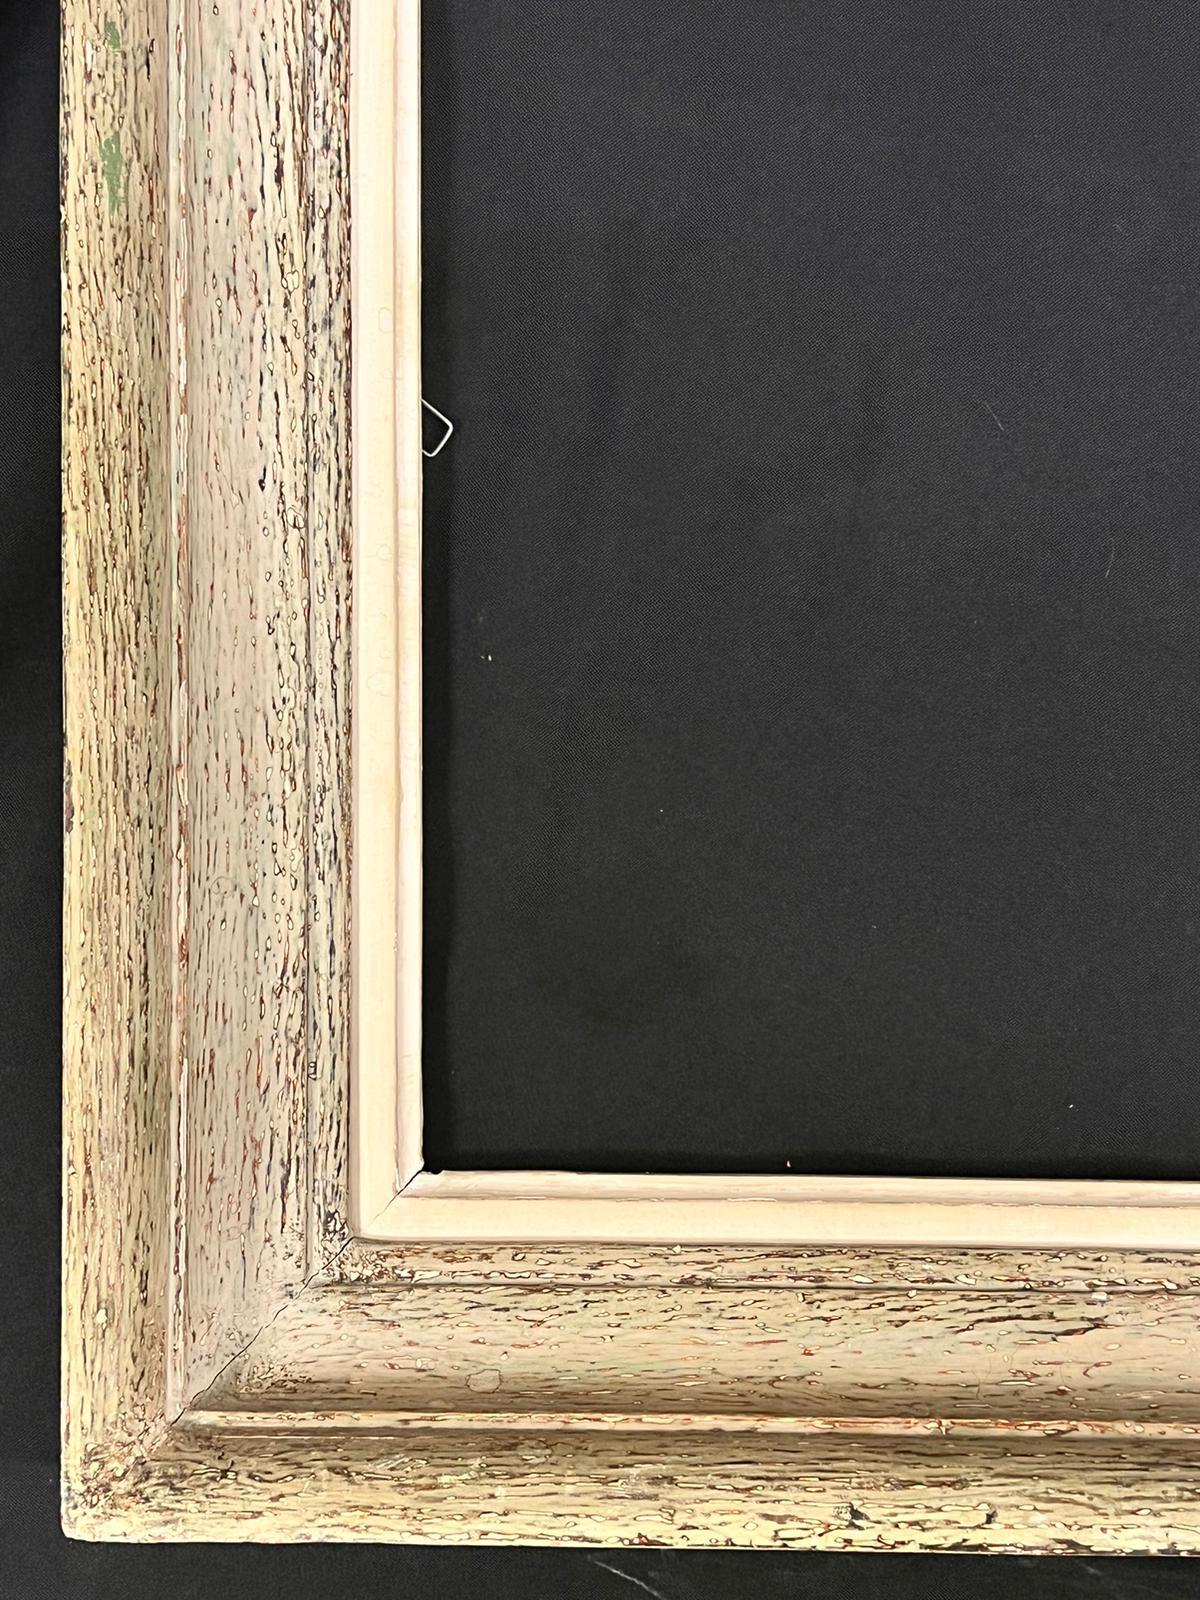 French mid 20th century
Montparnasse style picture frame
Wood and plaster 
Internal measurement (to house painting or mirror): 18 x 15 inches
Overal outer measurements: 24 x 21 inches
Provenance: from a collection in Paris
Condition: all old picture